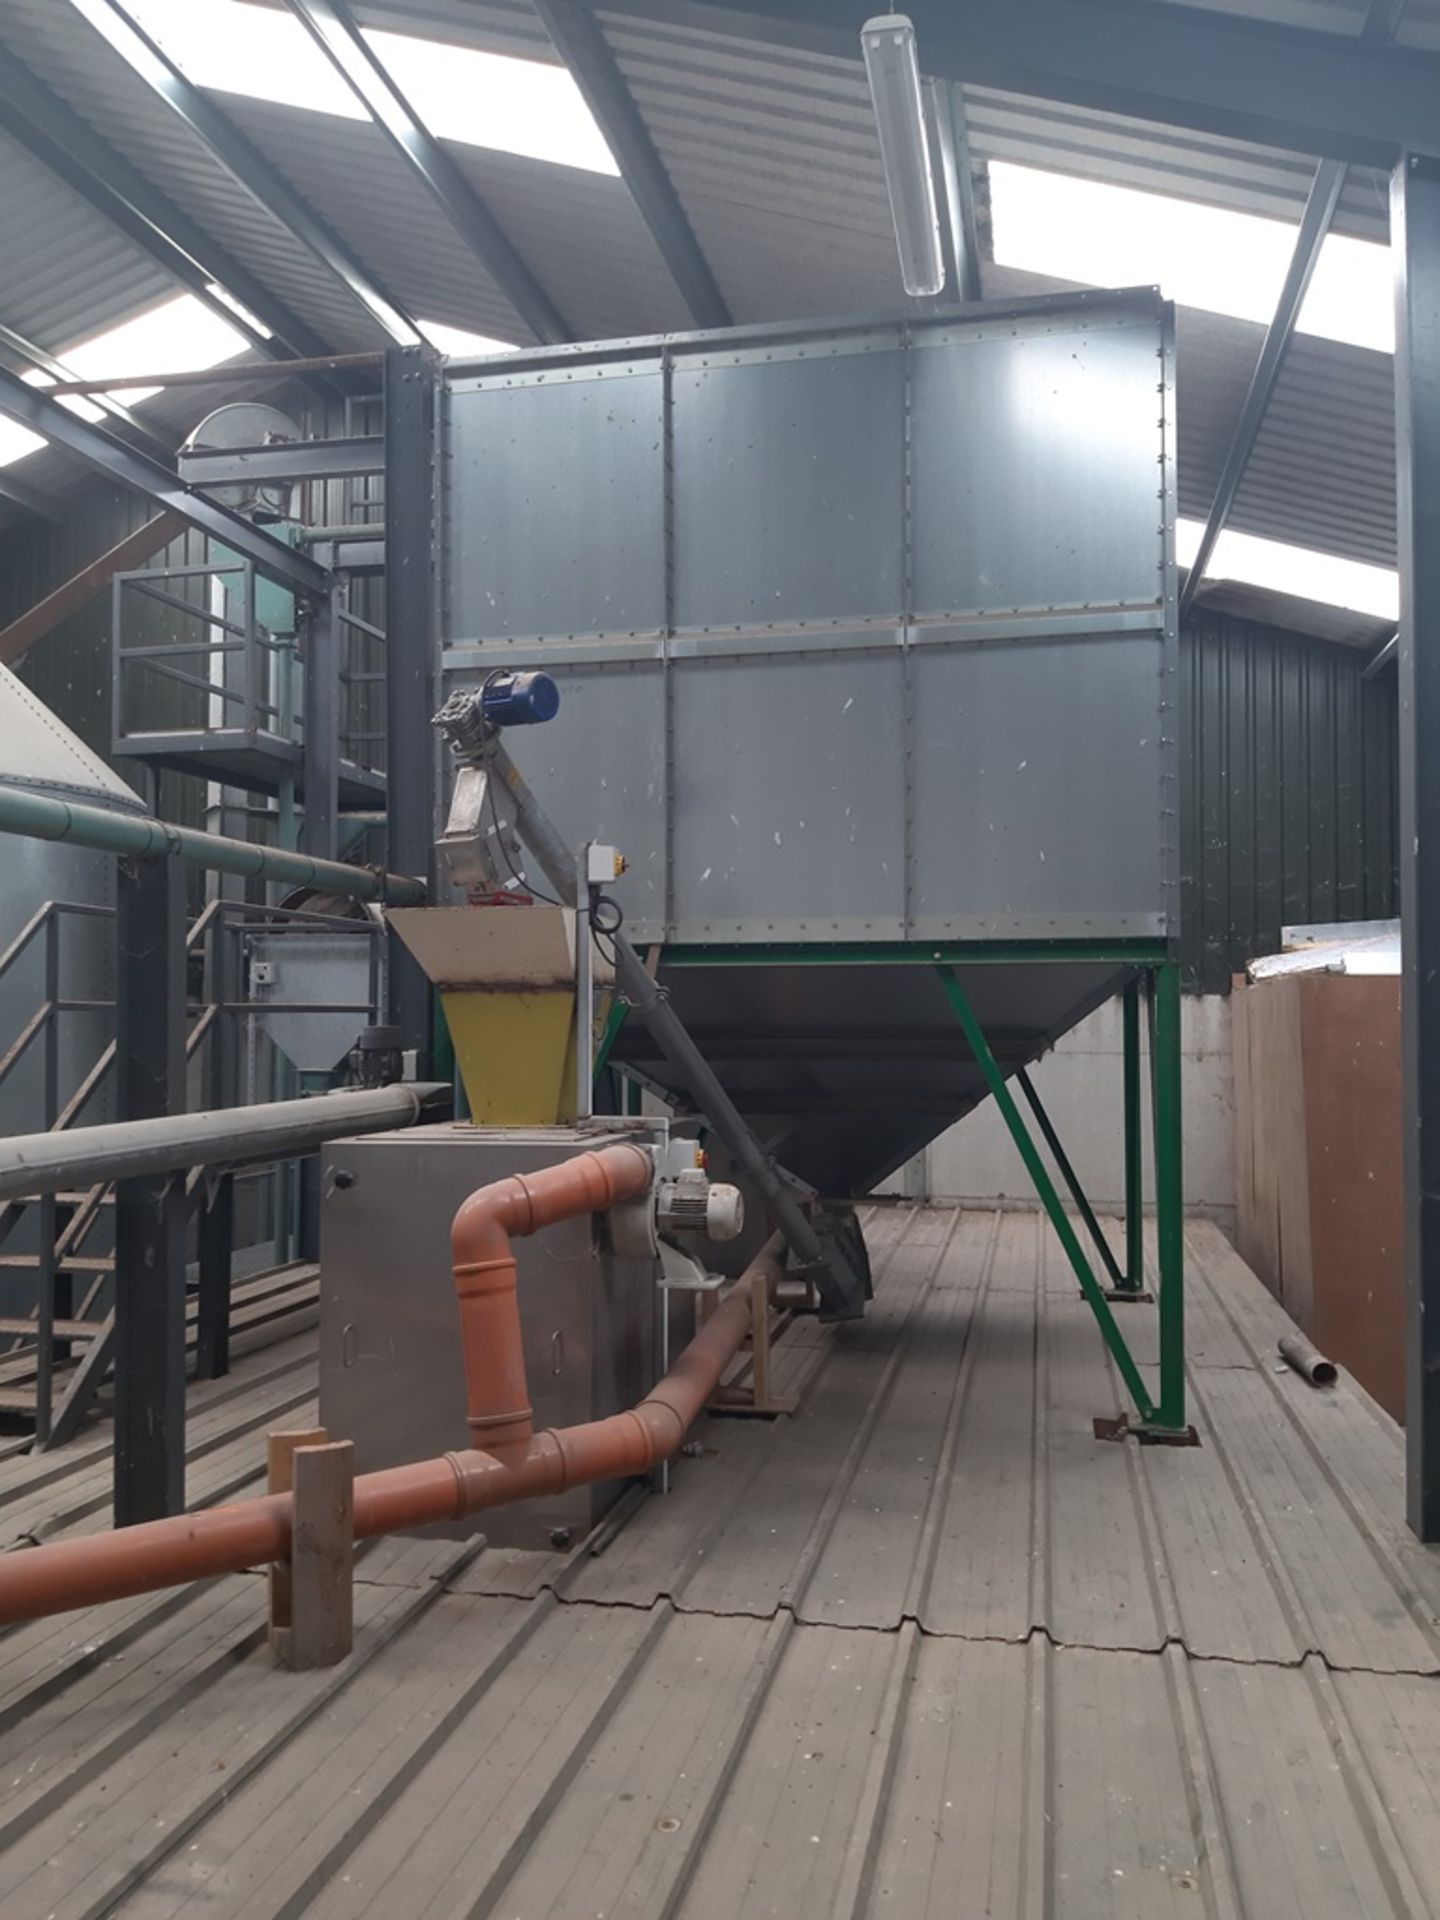 Oil Extraction Press - Complete Oil Seed Rape Extraction Plant, built with new machines in 2007 - Image 10 of 14